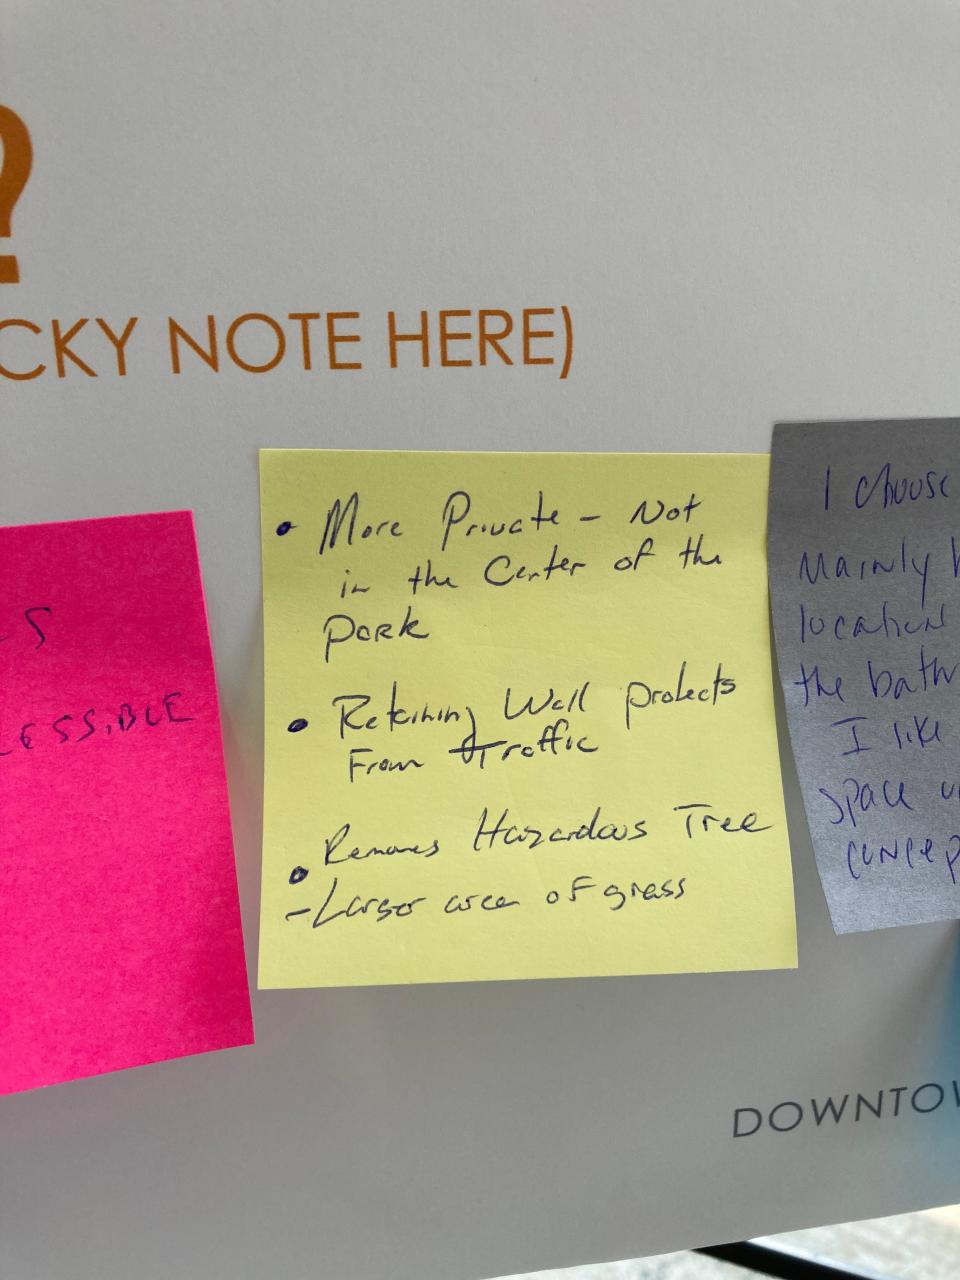 Sticky notes offer insight on people's thoughts around different restroom facility design concepts for downtown Asheville.